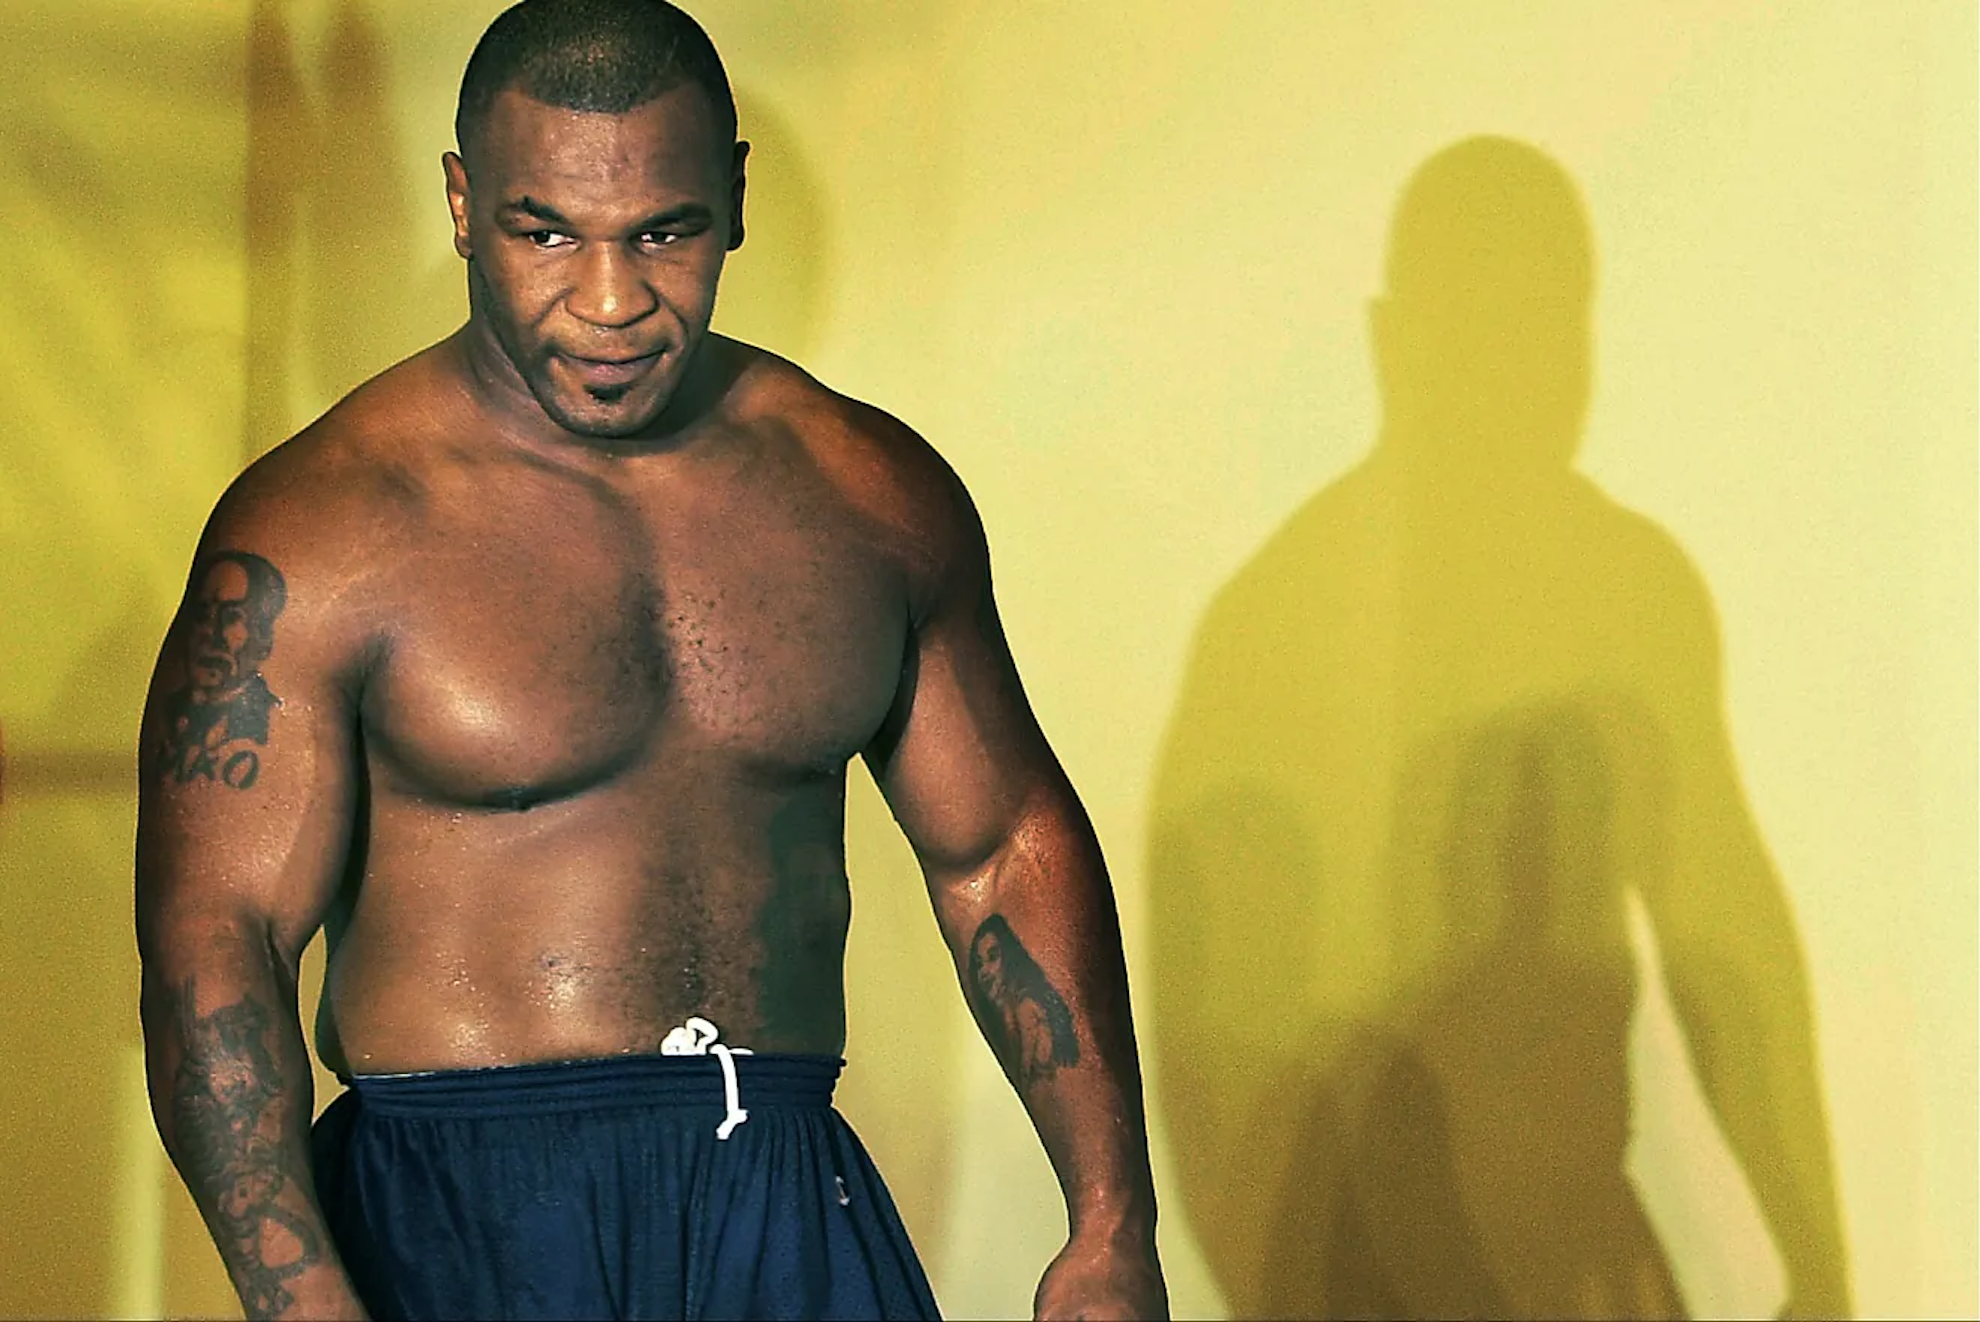 Mike Tyson goes topless and flexes his muscles as he calls out talk show host